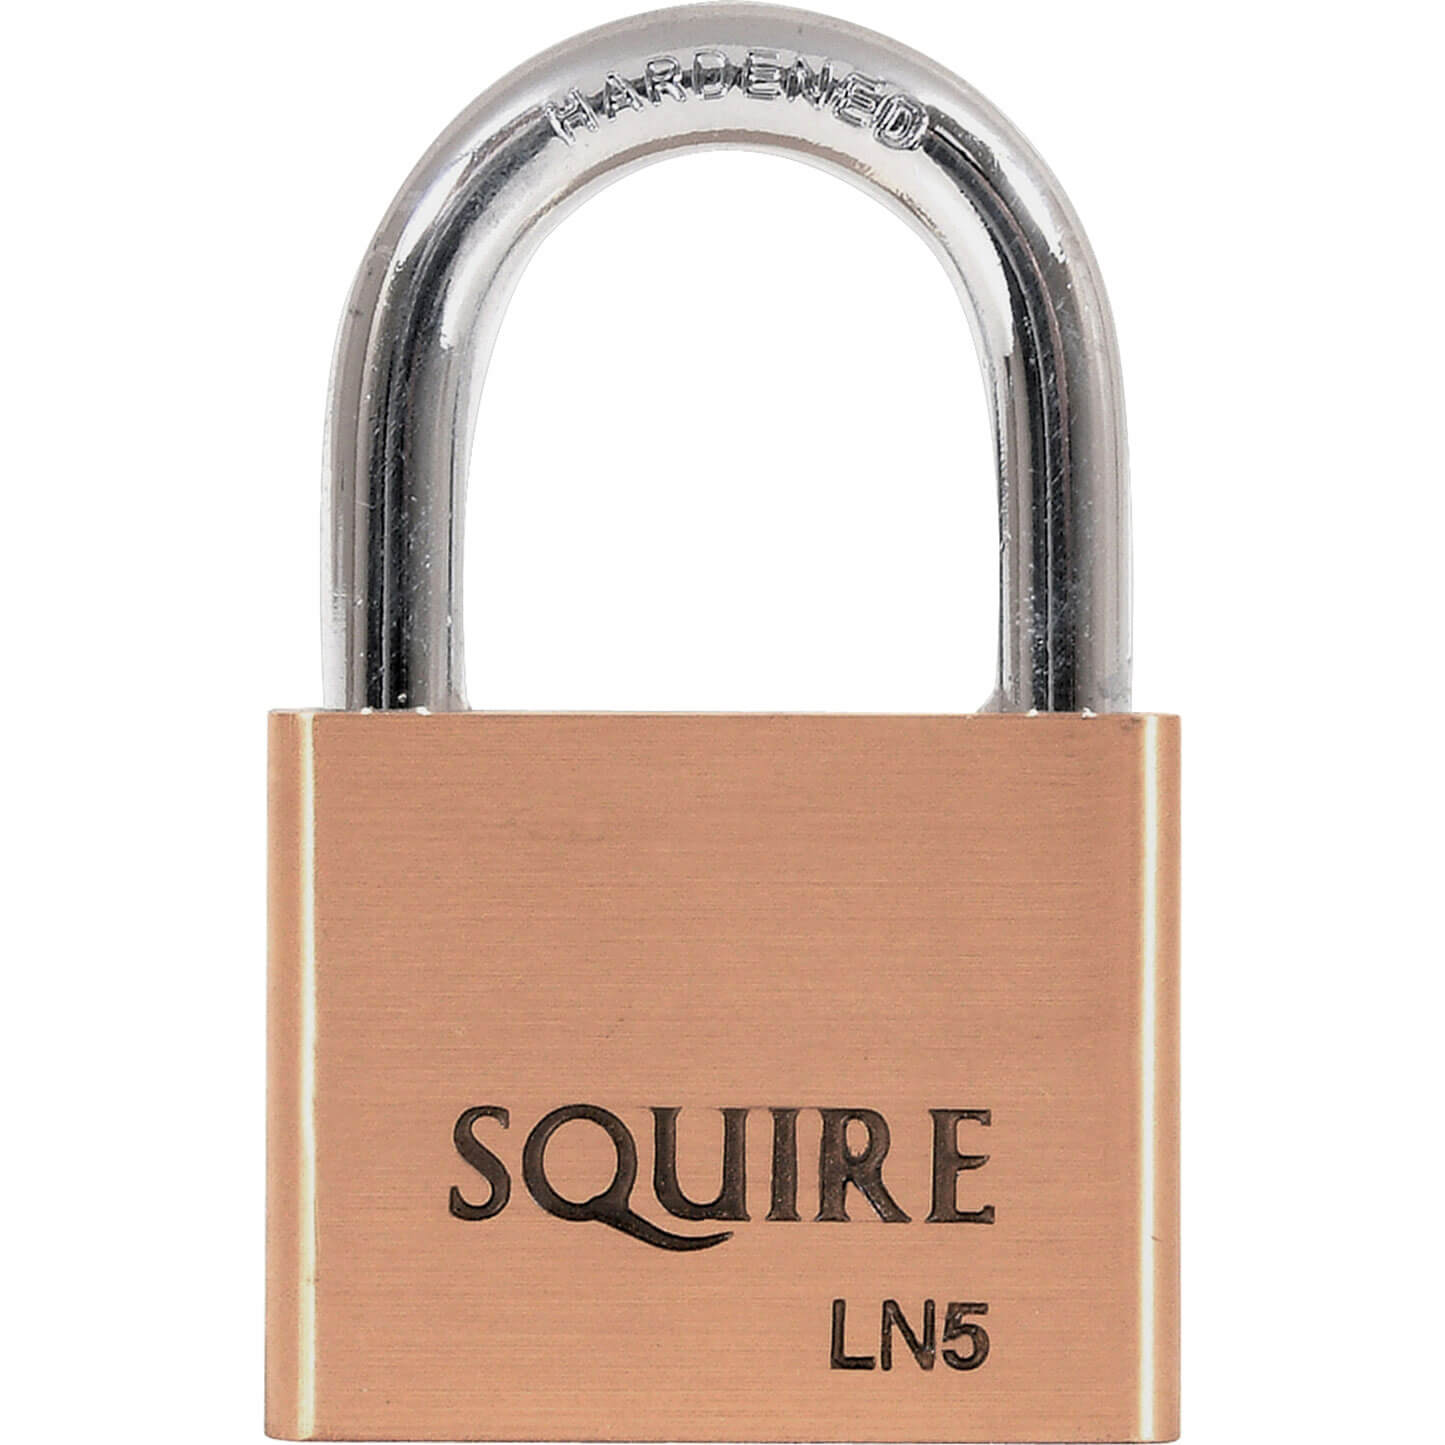 Image of Squire Lion Series Brass Padlock 50mm Standard